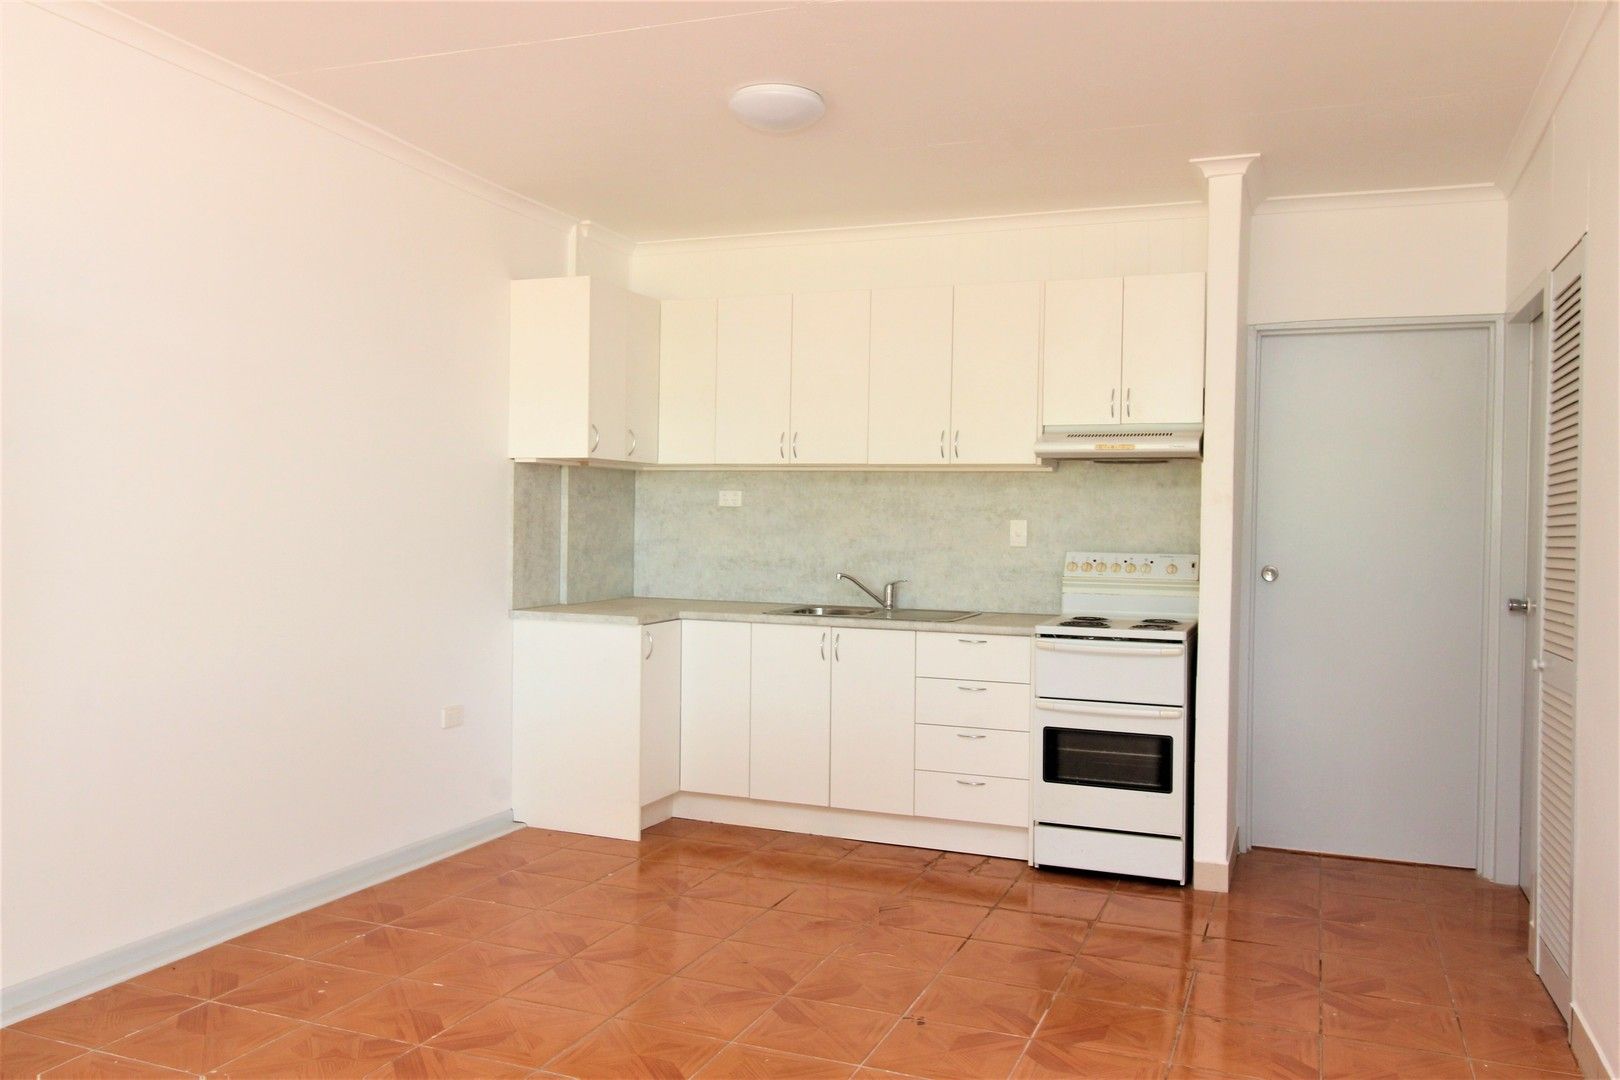 2 bedrooms Apartment / Unit / Flat in Unit 2/8 Carbine Ave MOUNT ISA QLD, 4825